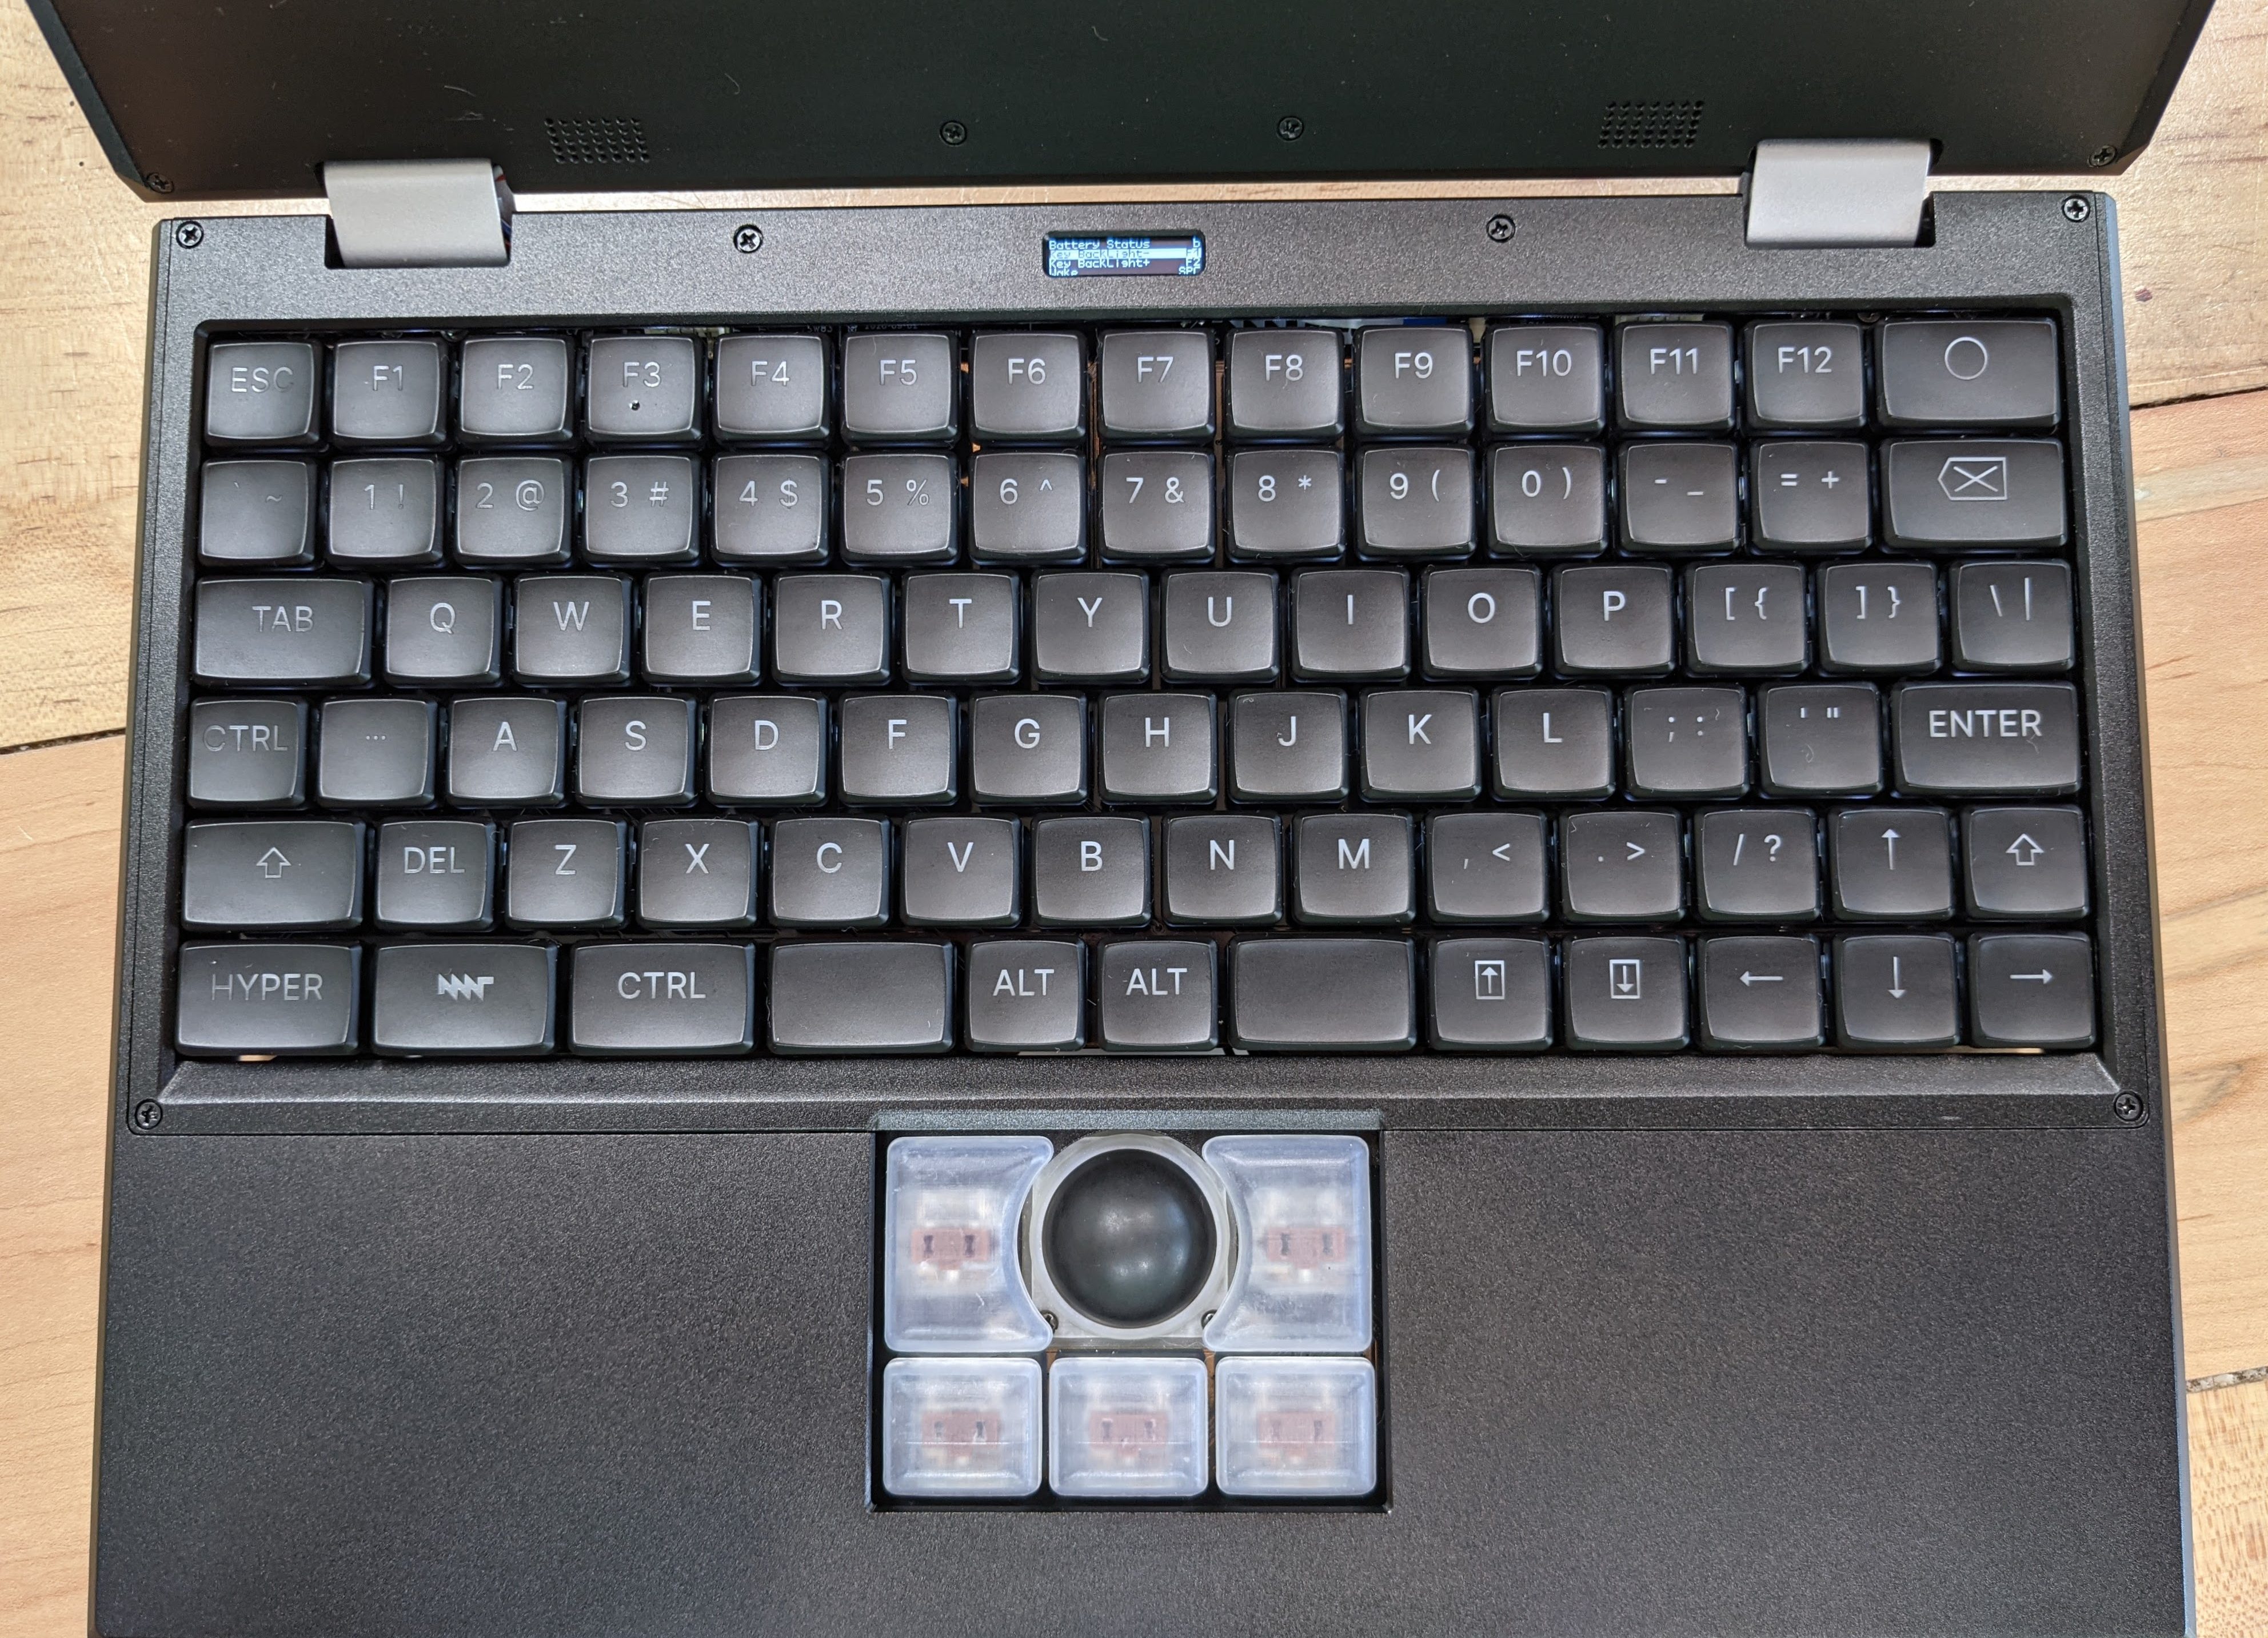 a top down view of a laptop showing the keyboard and track ball